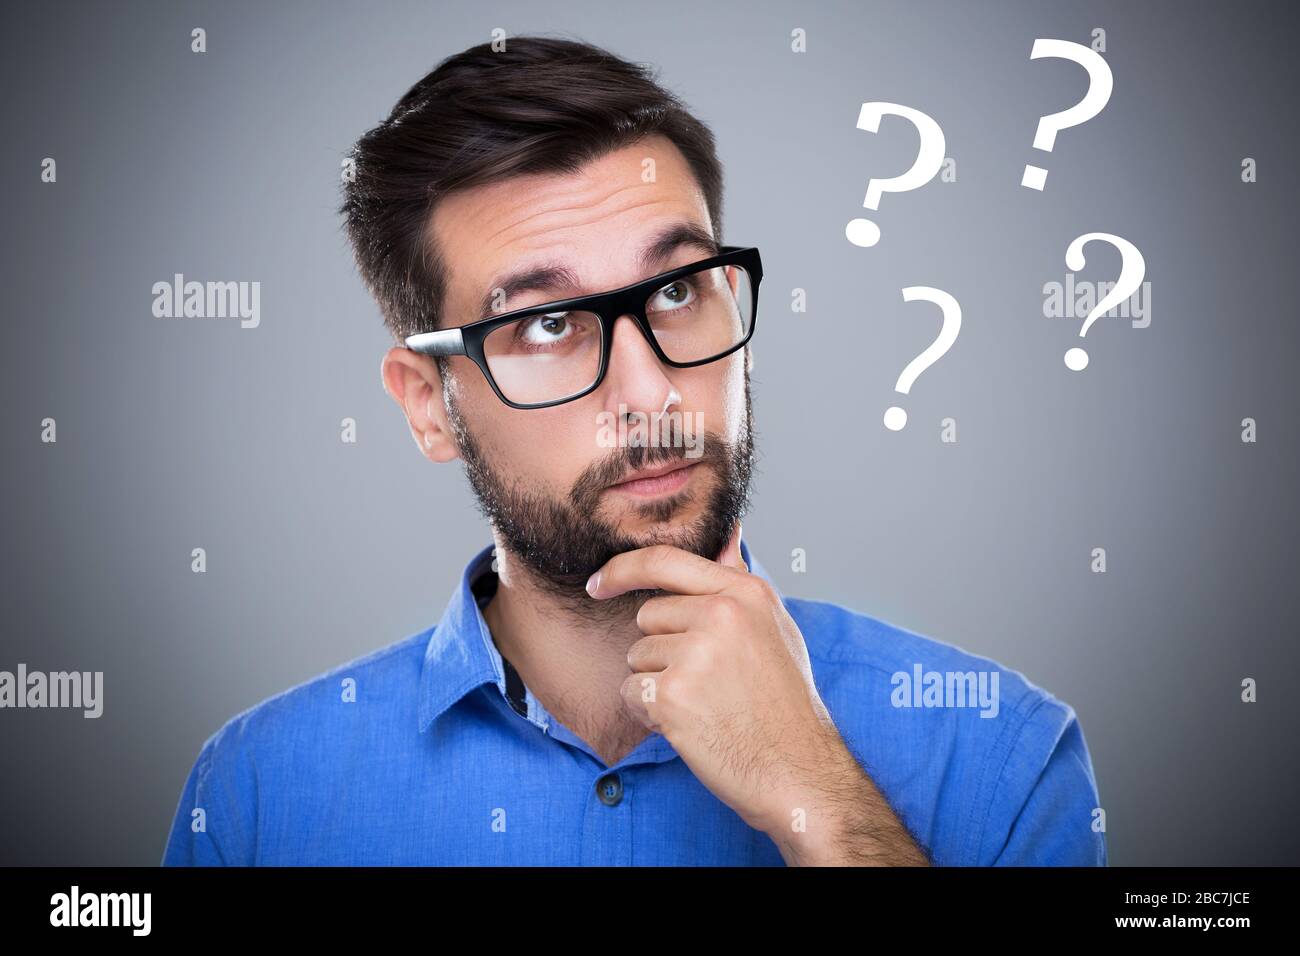 Man thinking with question marks Stock Photo